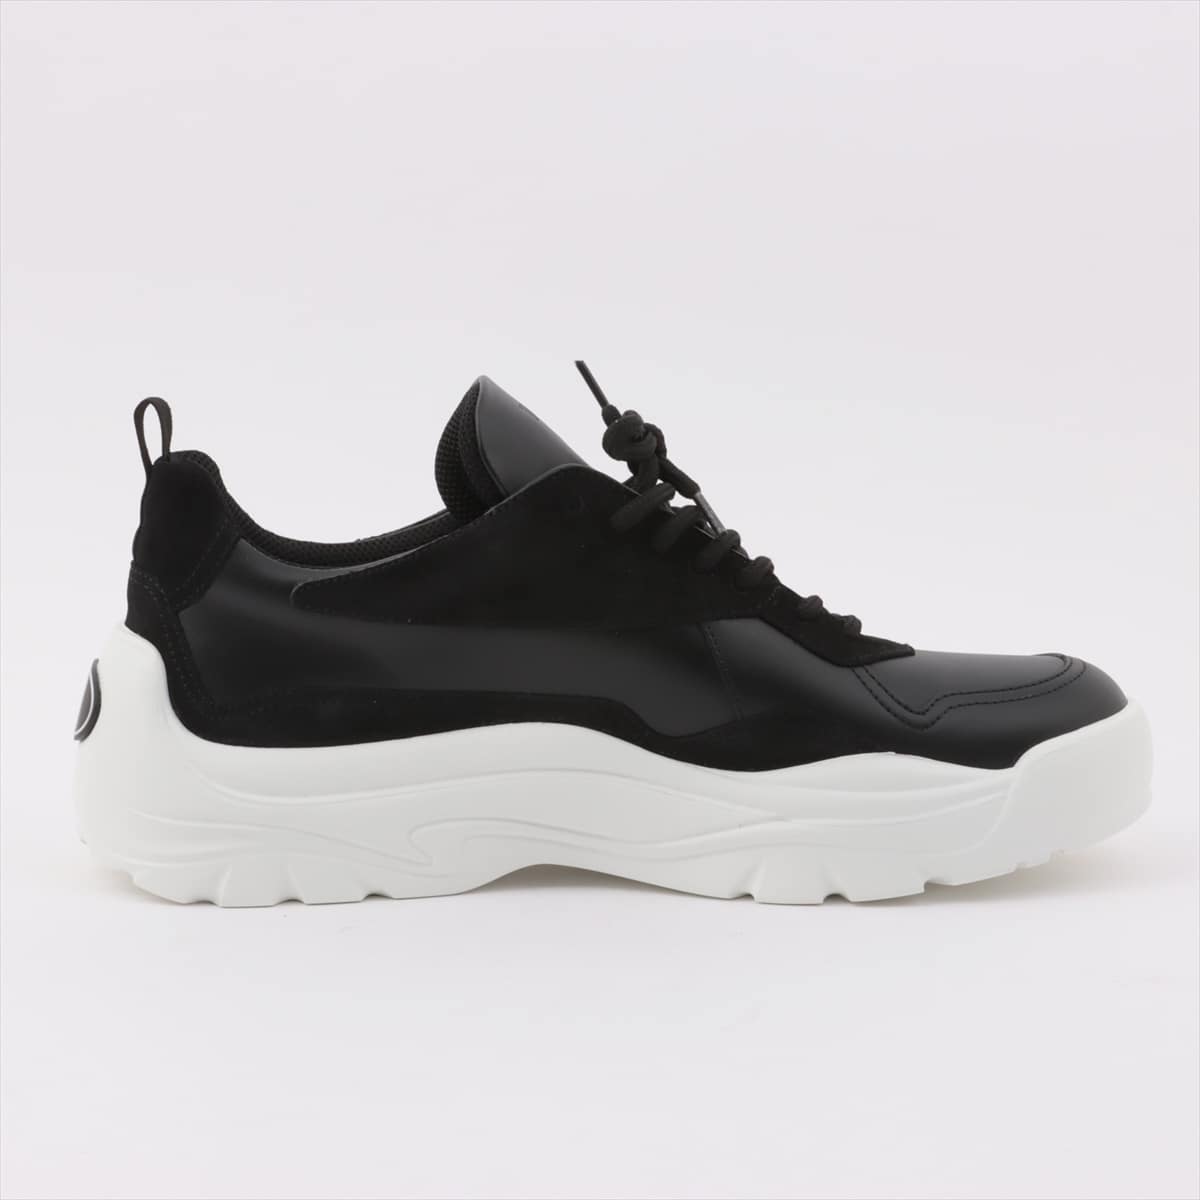 Valentino Garavani Leather Sneakers 44 Men's Black × White Gumboy sneakers Is there a replacement string